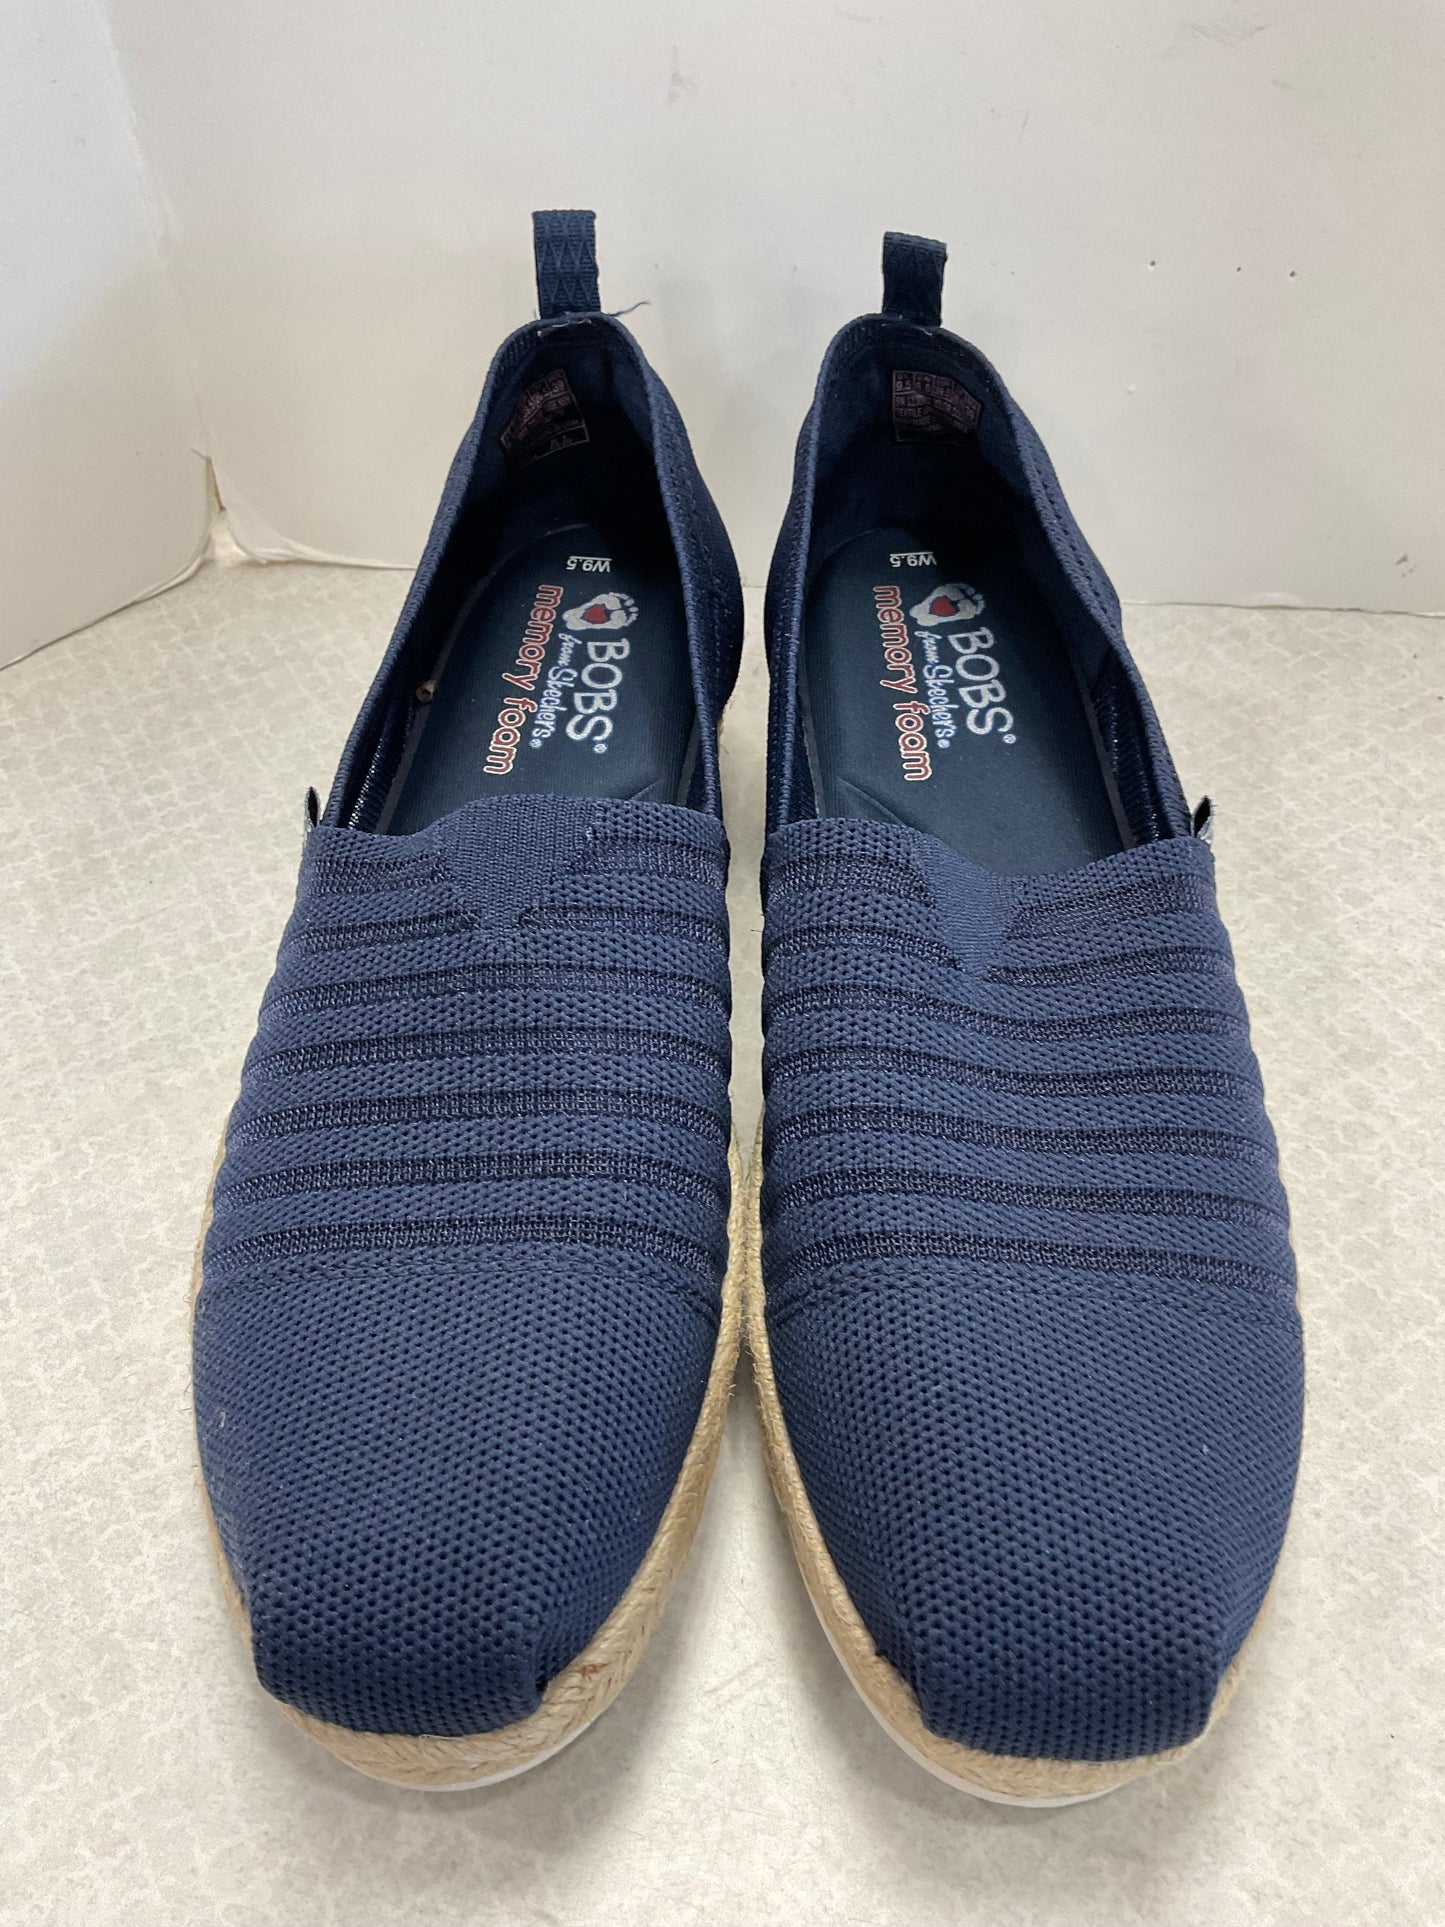 Navy Shoes Flats Bobs, Size 9.5